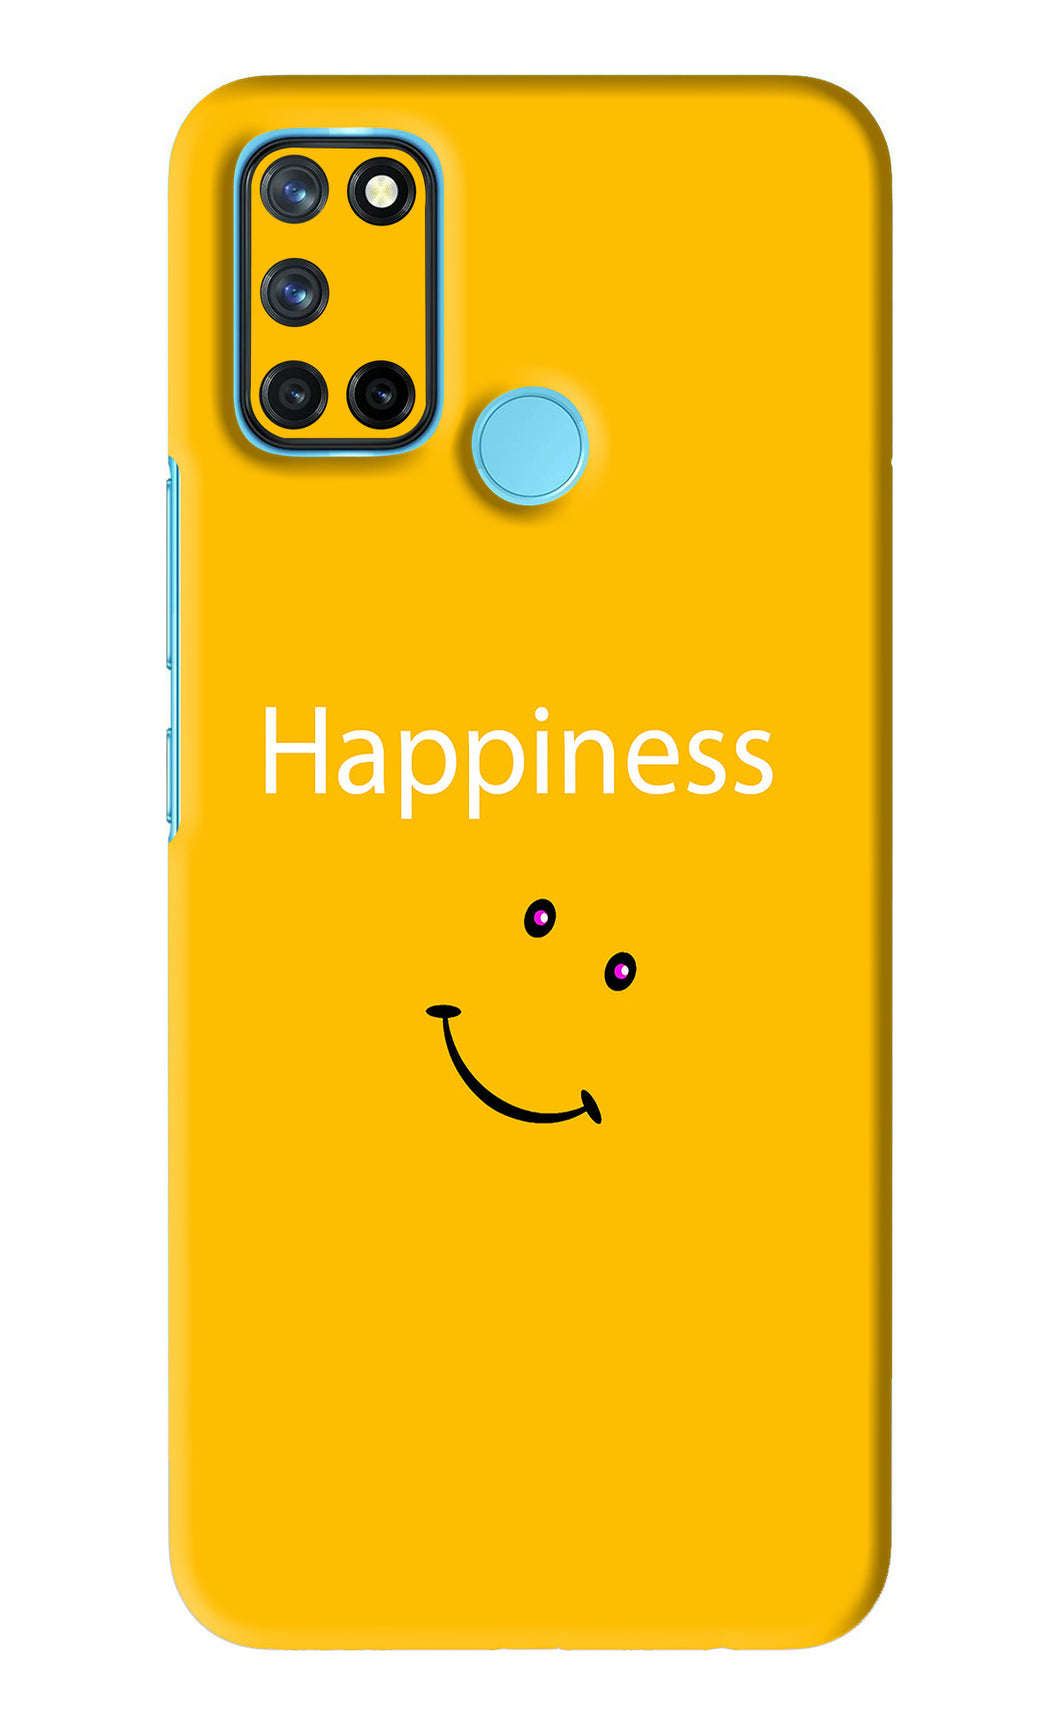 Happiness With Smiley Realme C17 Back Skin Wrap